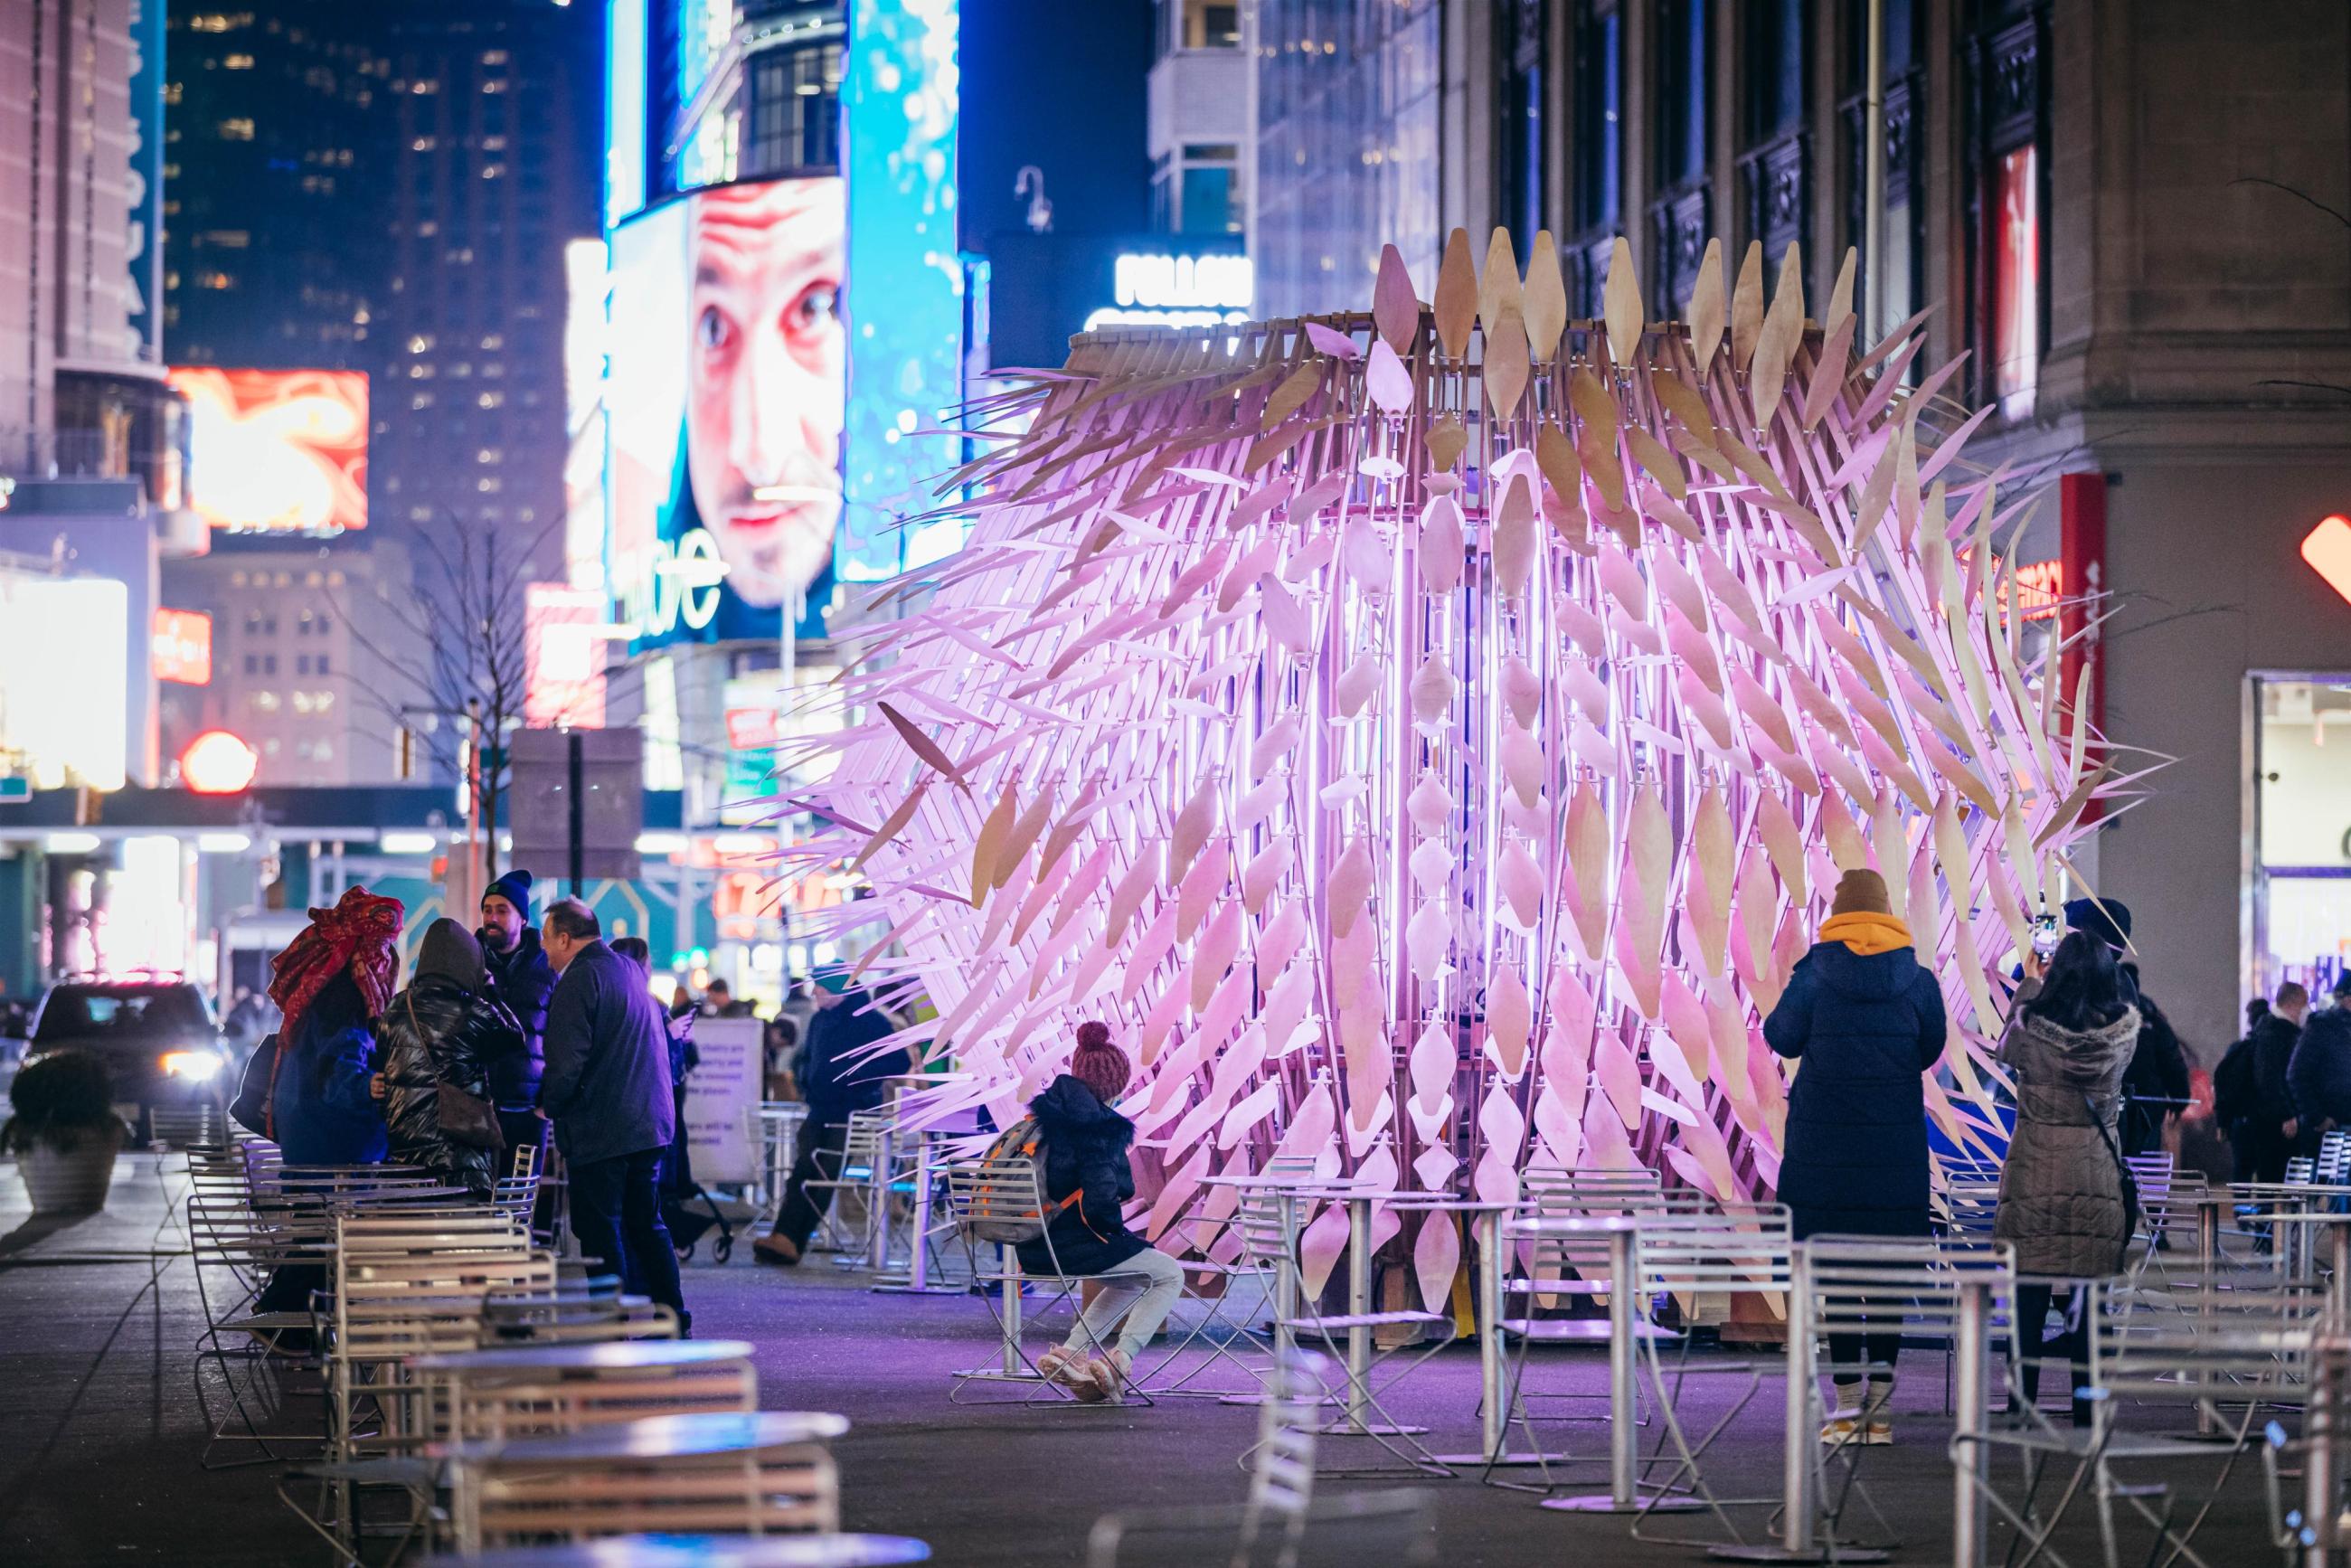 A glowing spikey ball of purple light on the Garment district plaza